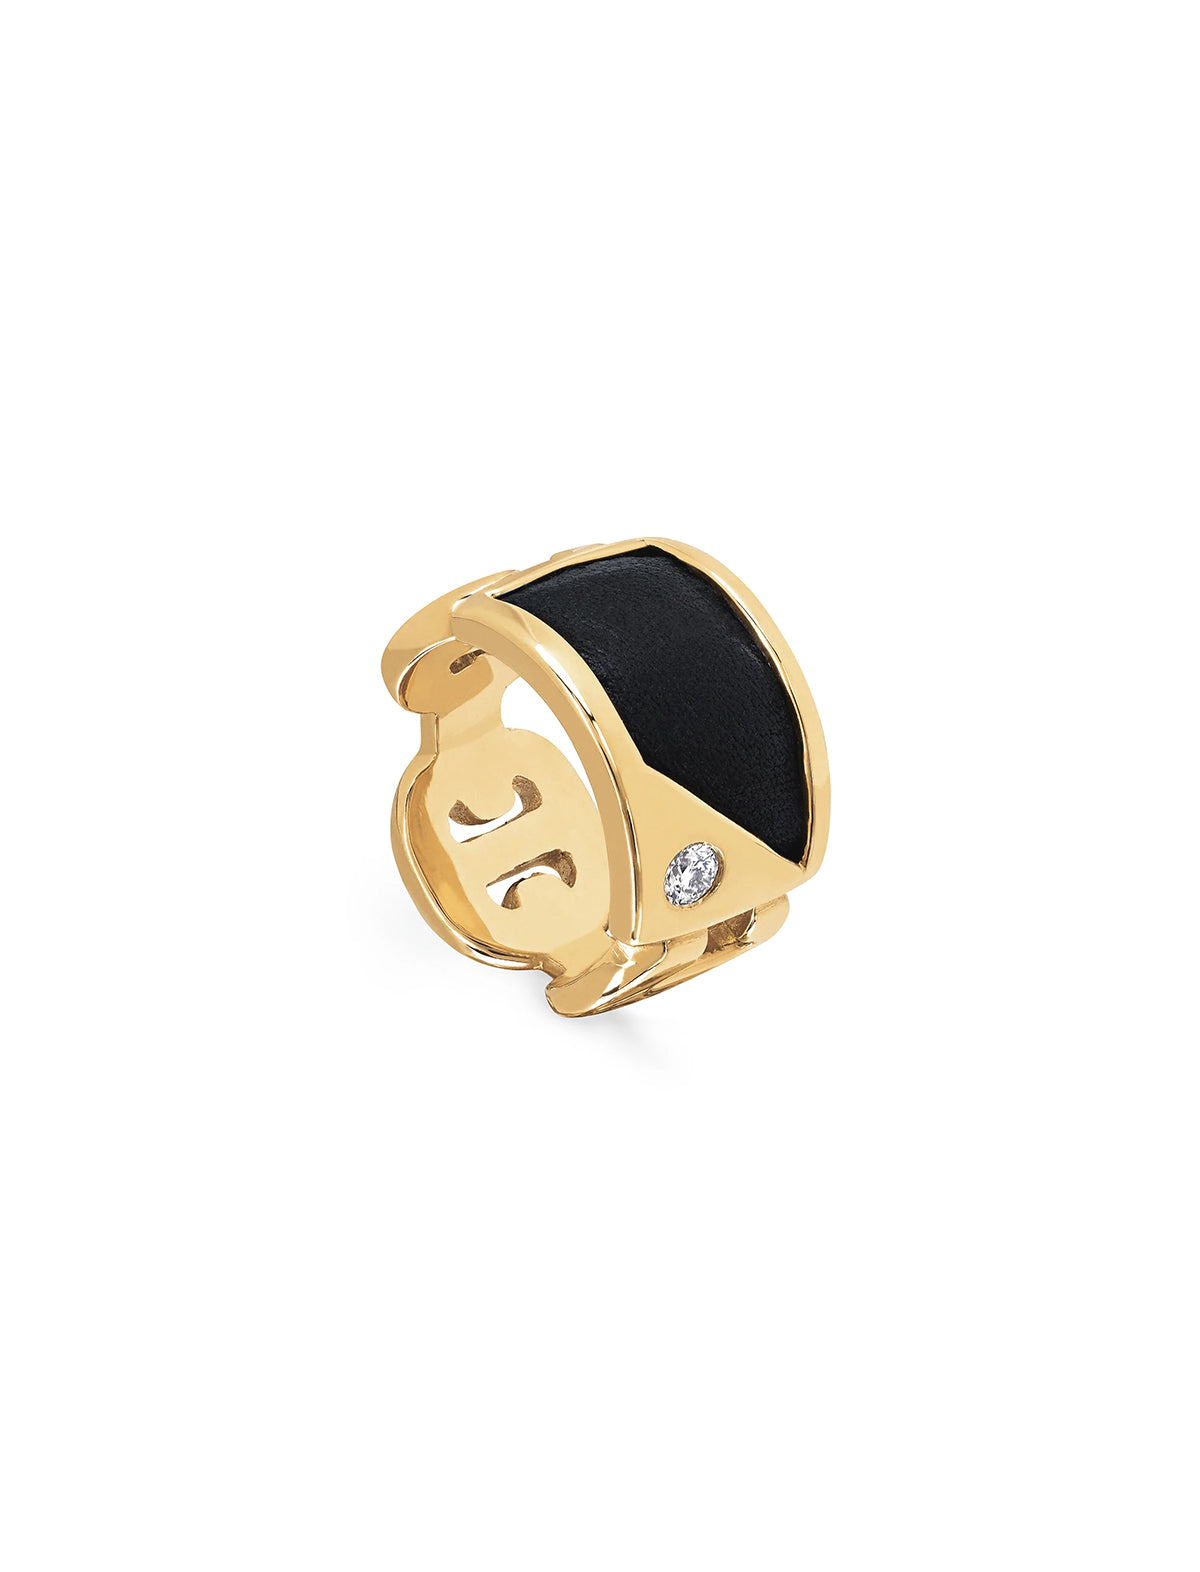 HOORSENBUHS Lounge Leather Plate with Diamond Kiss Ring 18k Yellow Gold